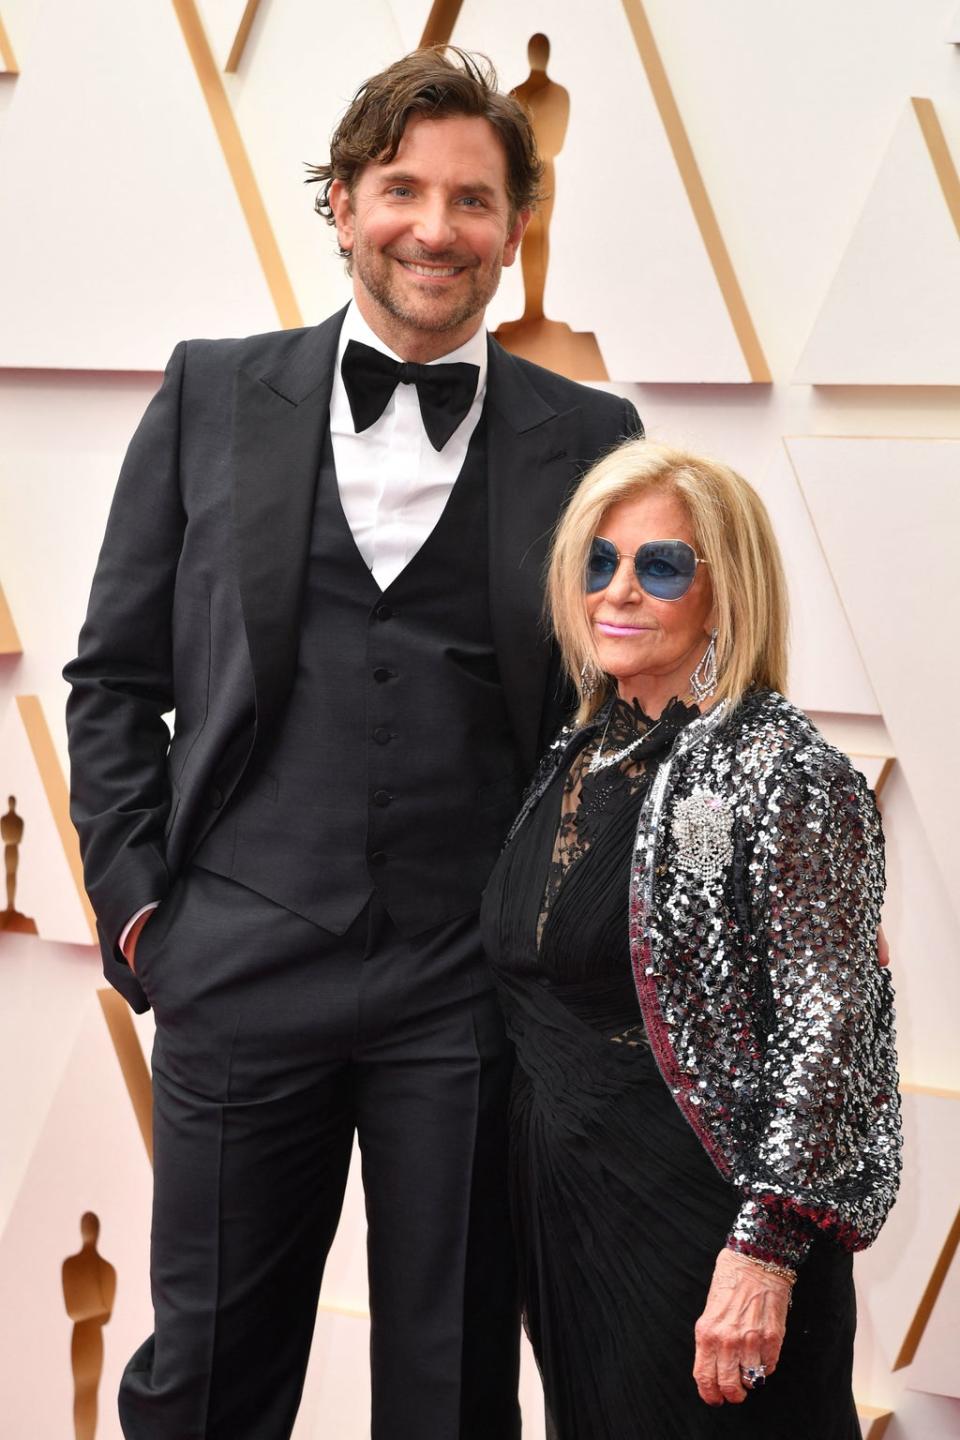 Bradley Cooper attends the Oscars 2022 with his mom, Gloria Campano (AFP via Getty Images)